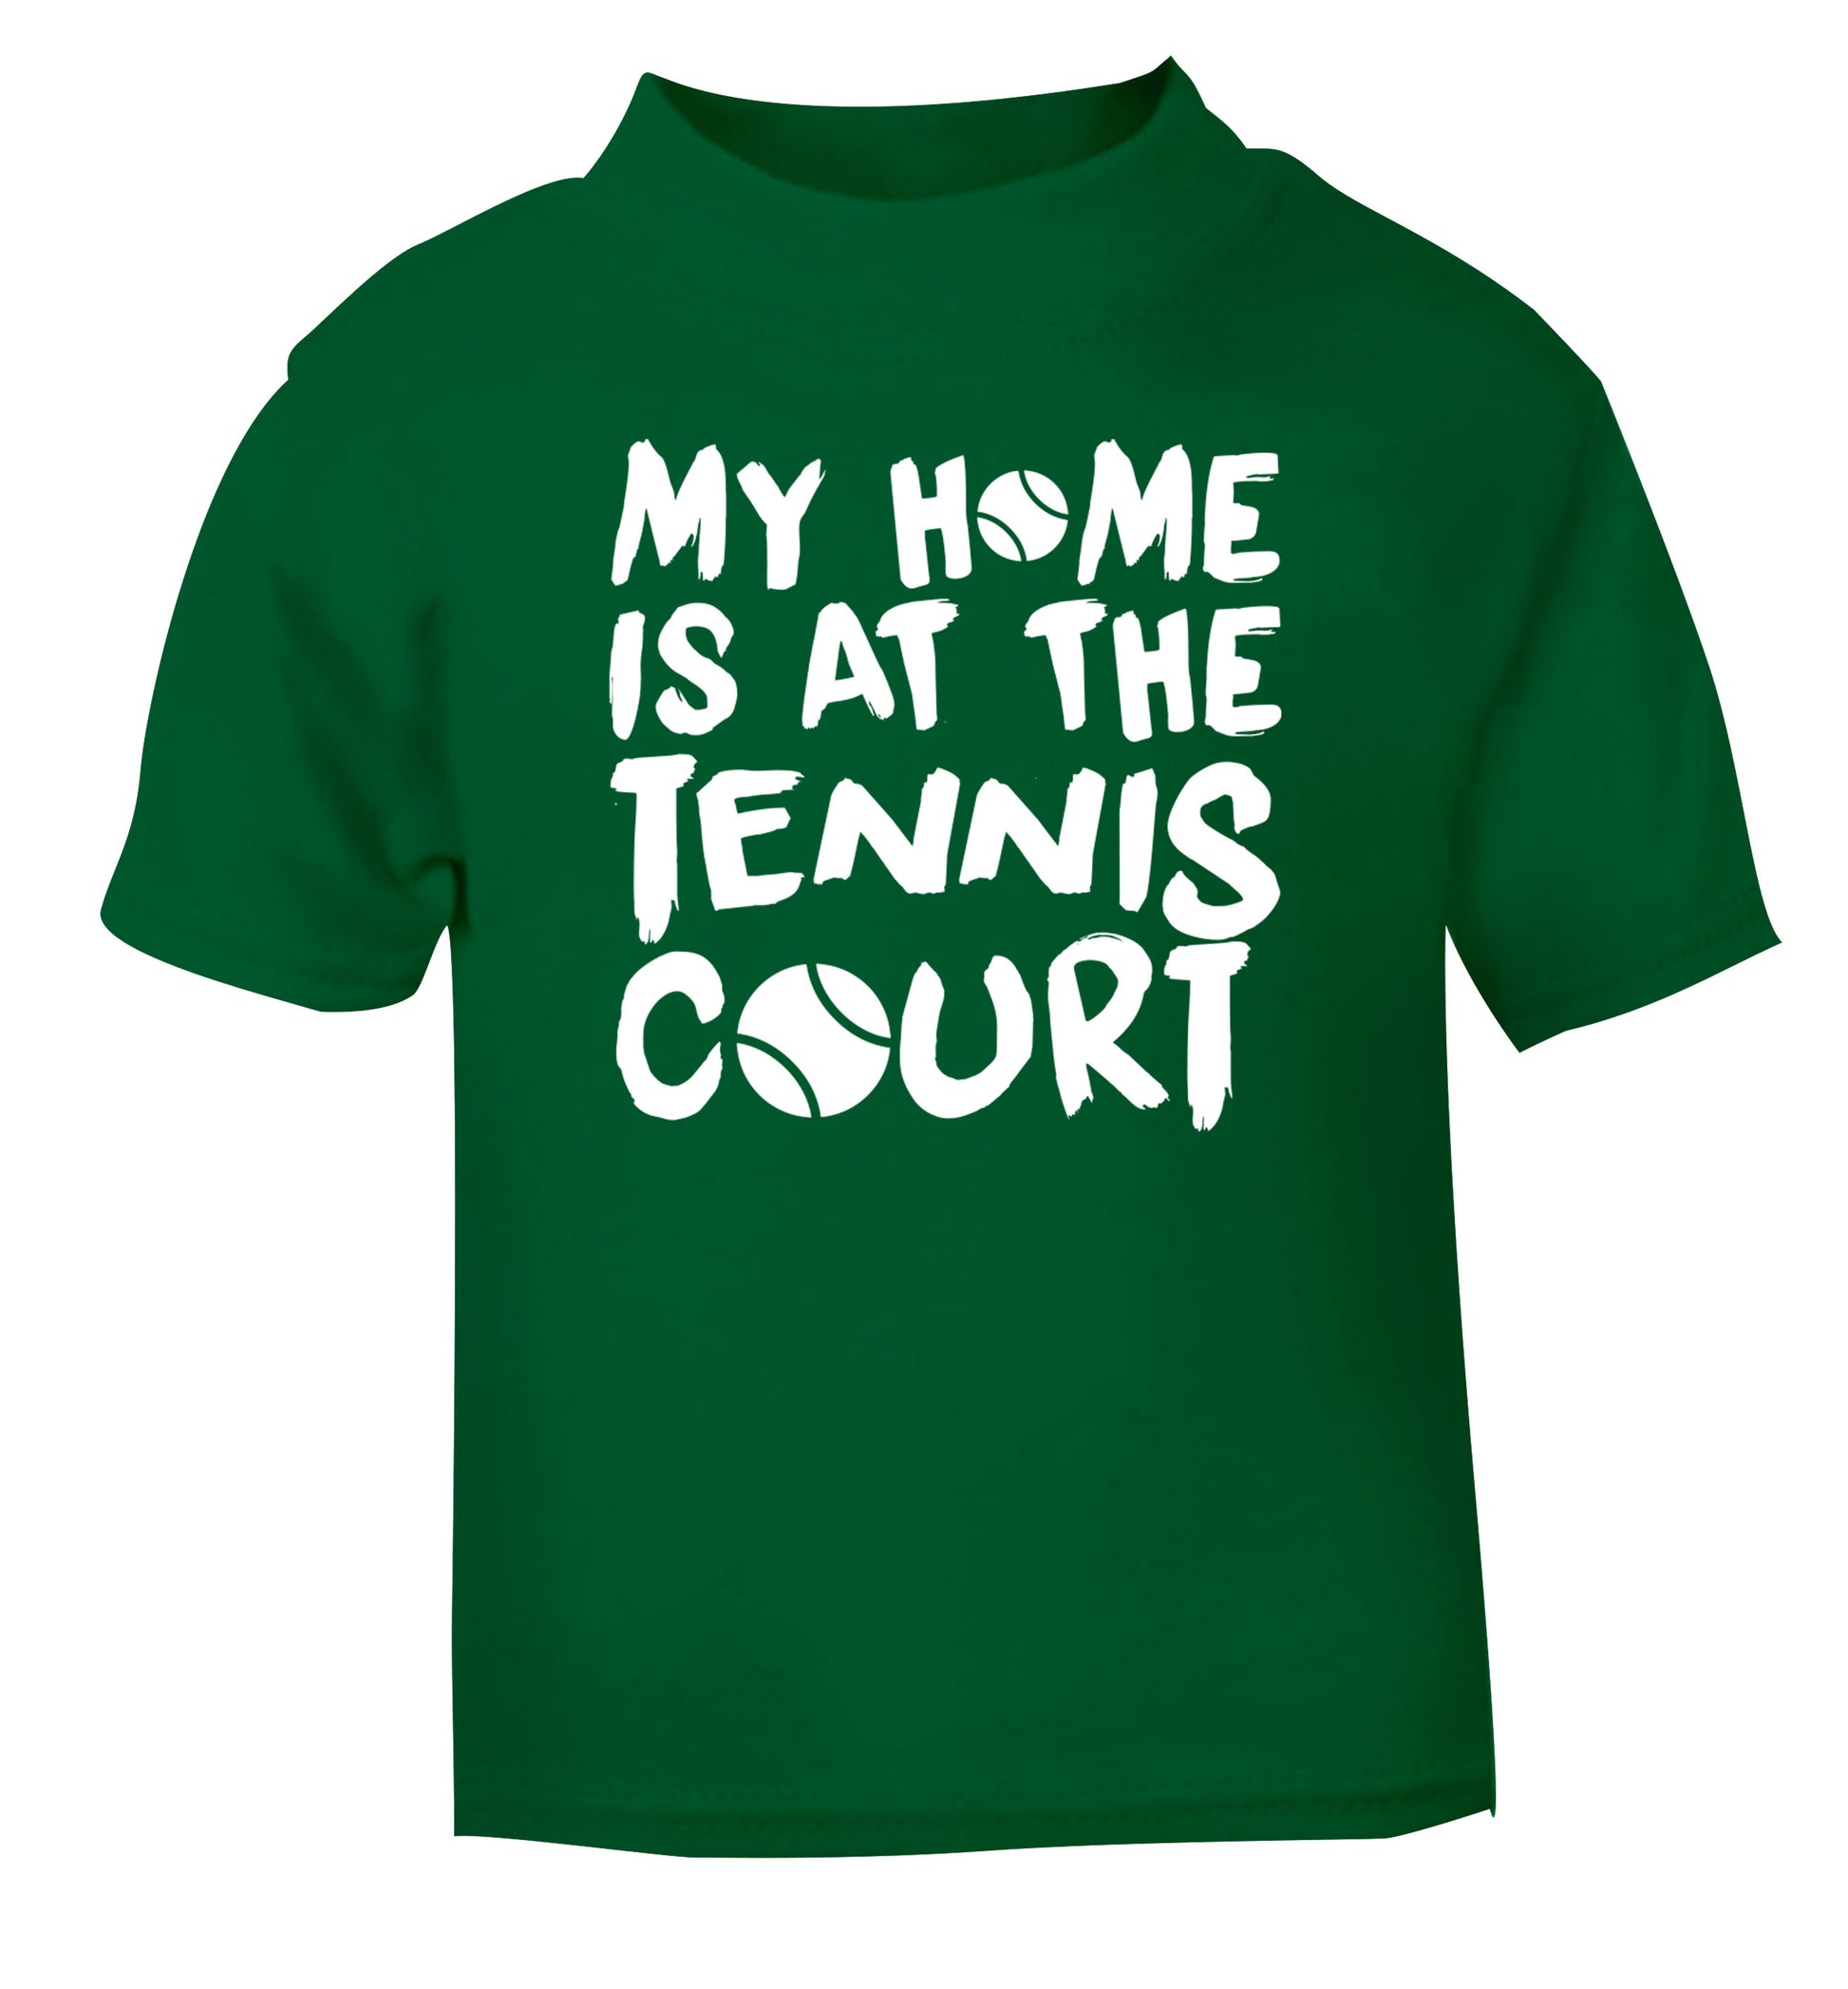 My home is at the tennis court green Baby Toddler Tshirt 2 Years